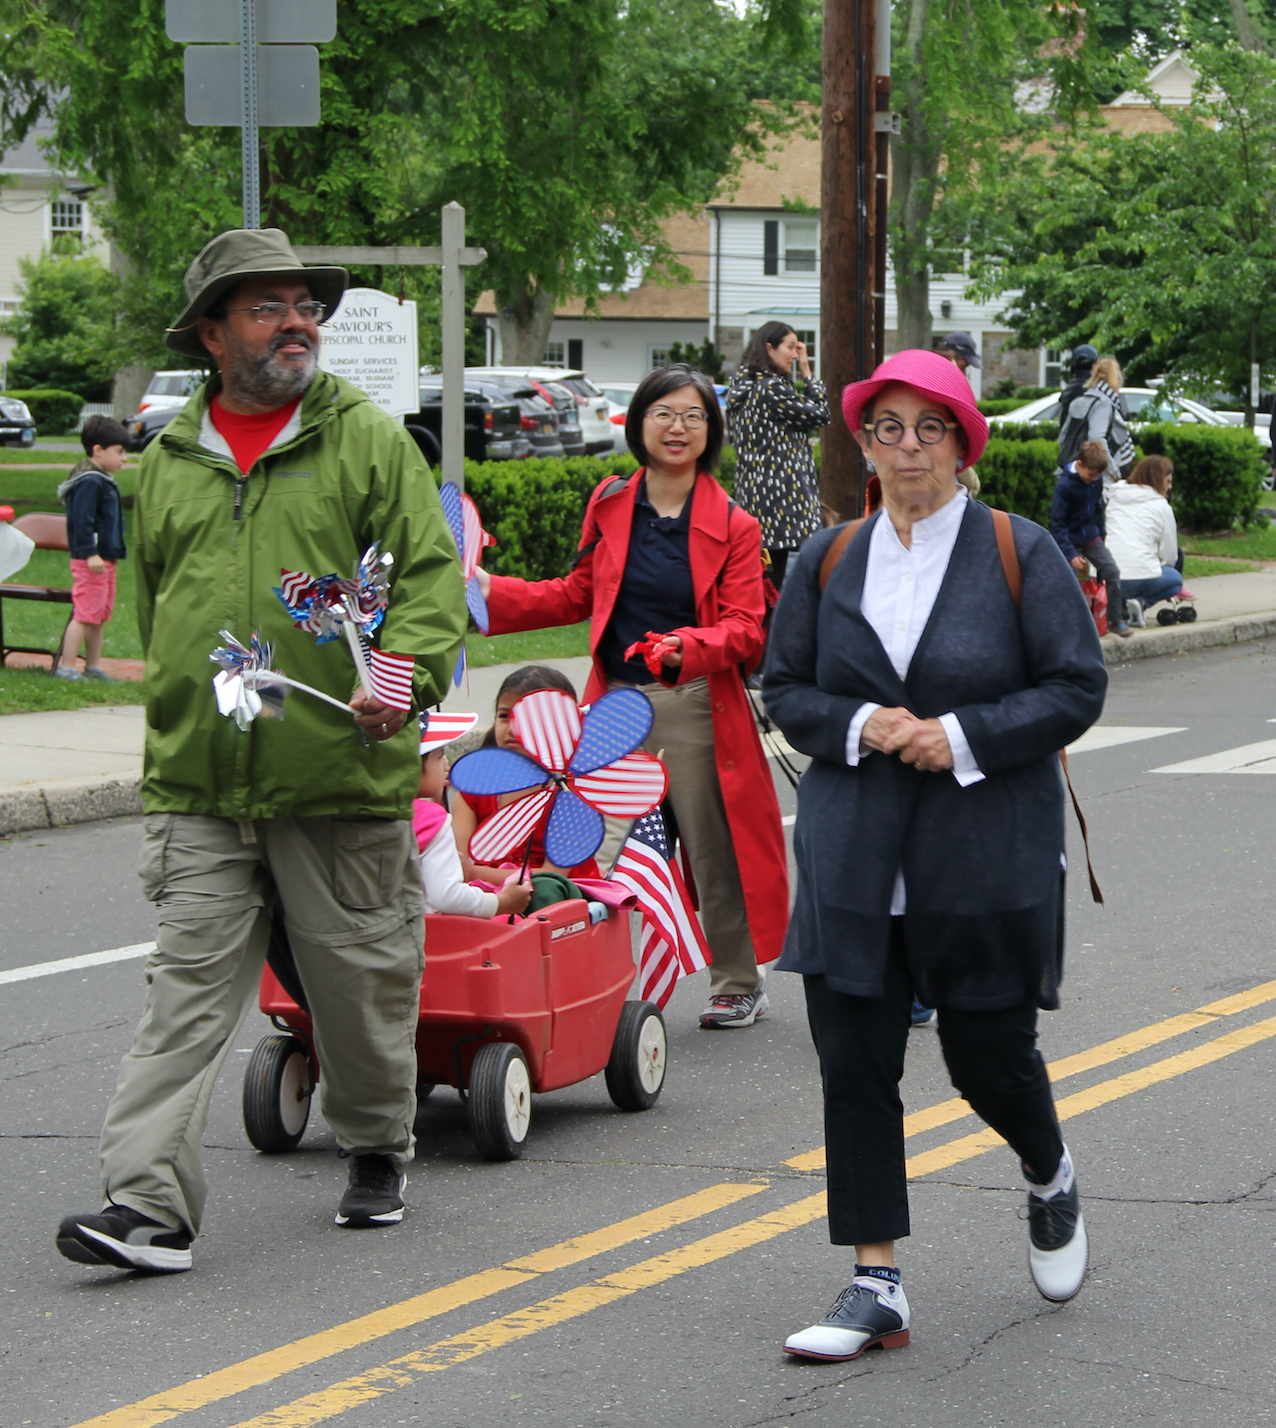 Old Greenwich Memorial Day Parade, May 29, 2017 Photo: Leslie Perry